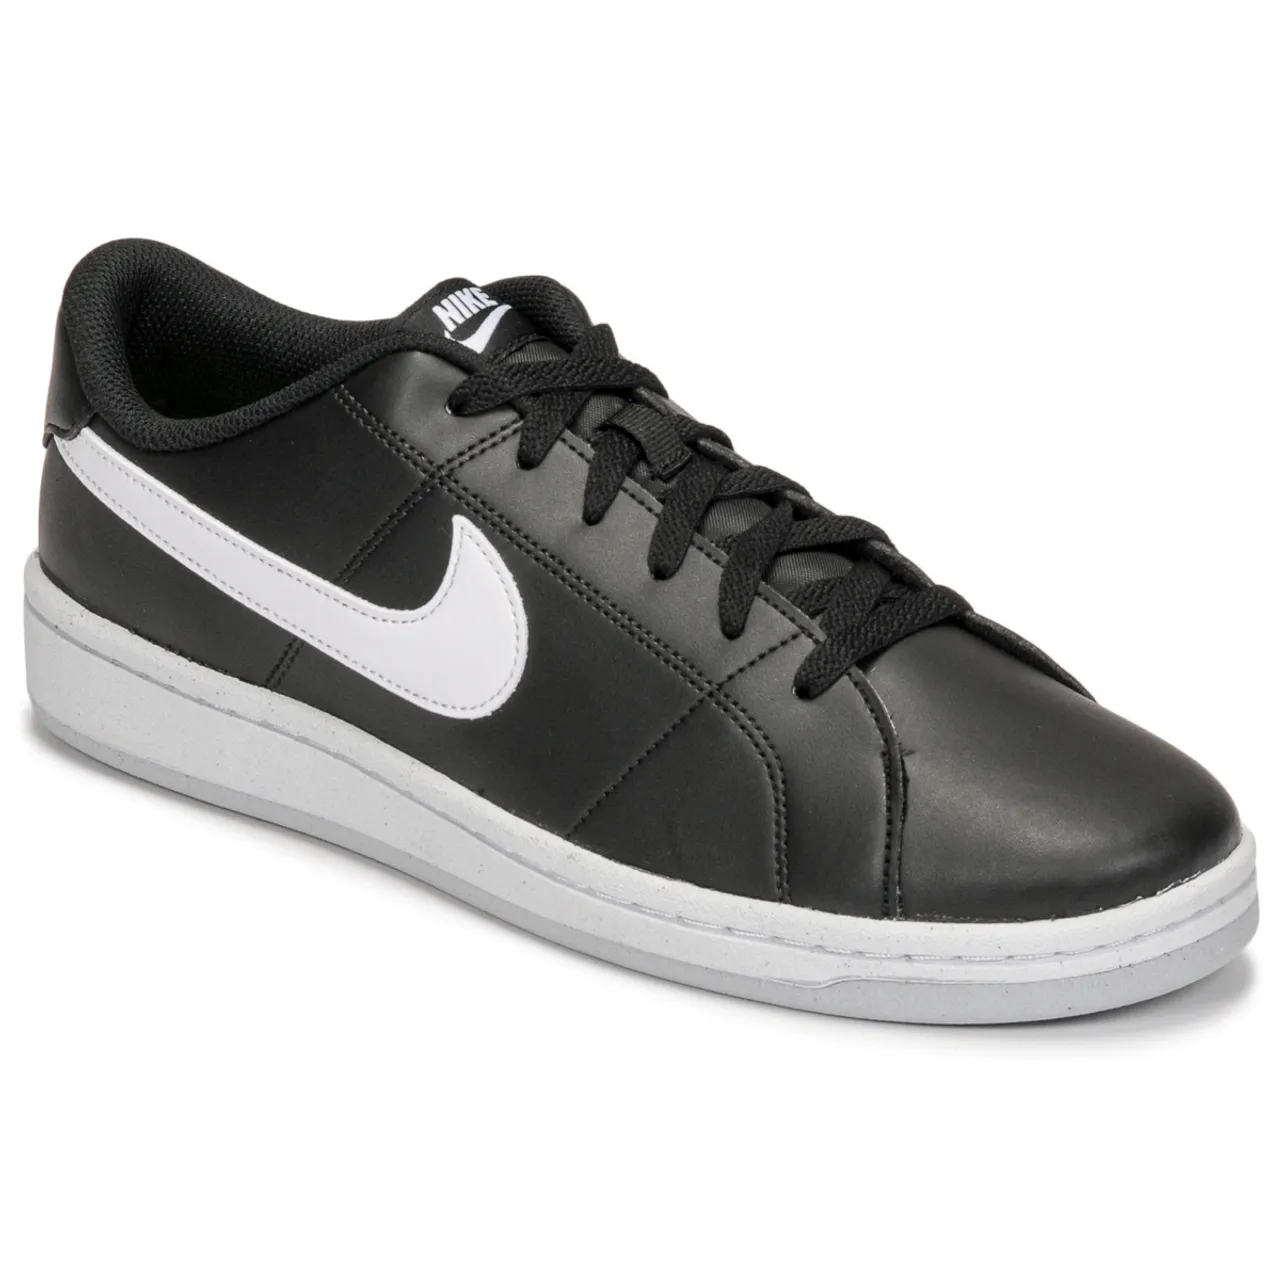 Nike  NIKE COURT ROYALE 2 NN  men's Shoes (Trainers) in Black